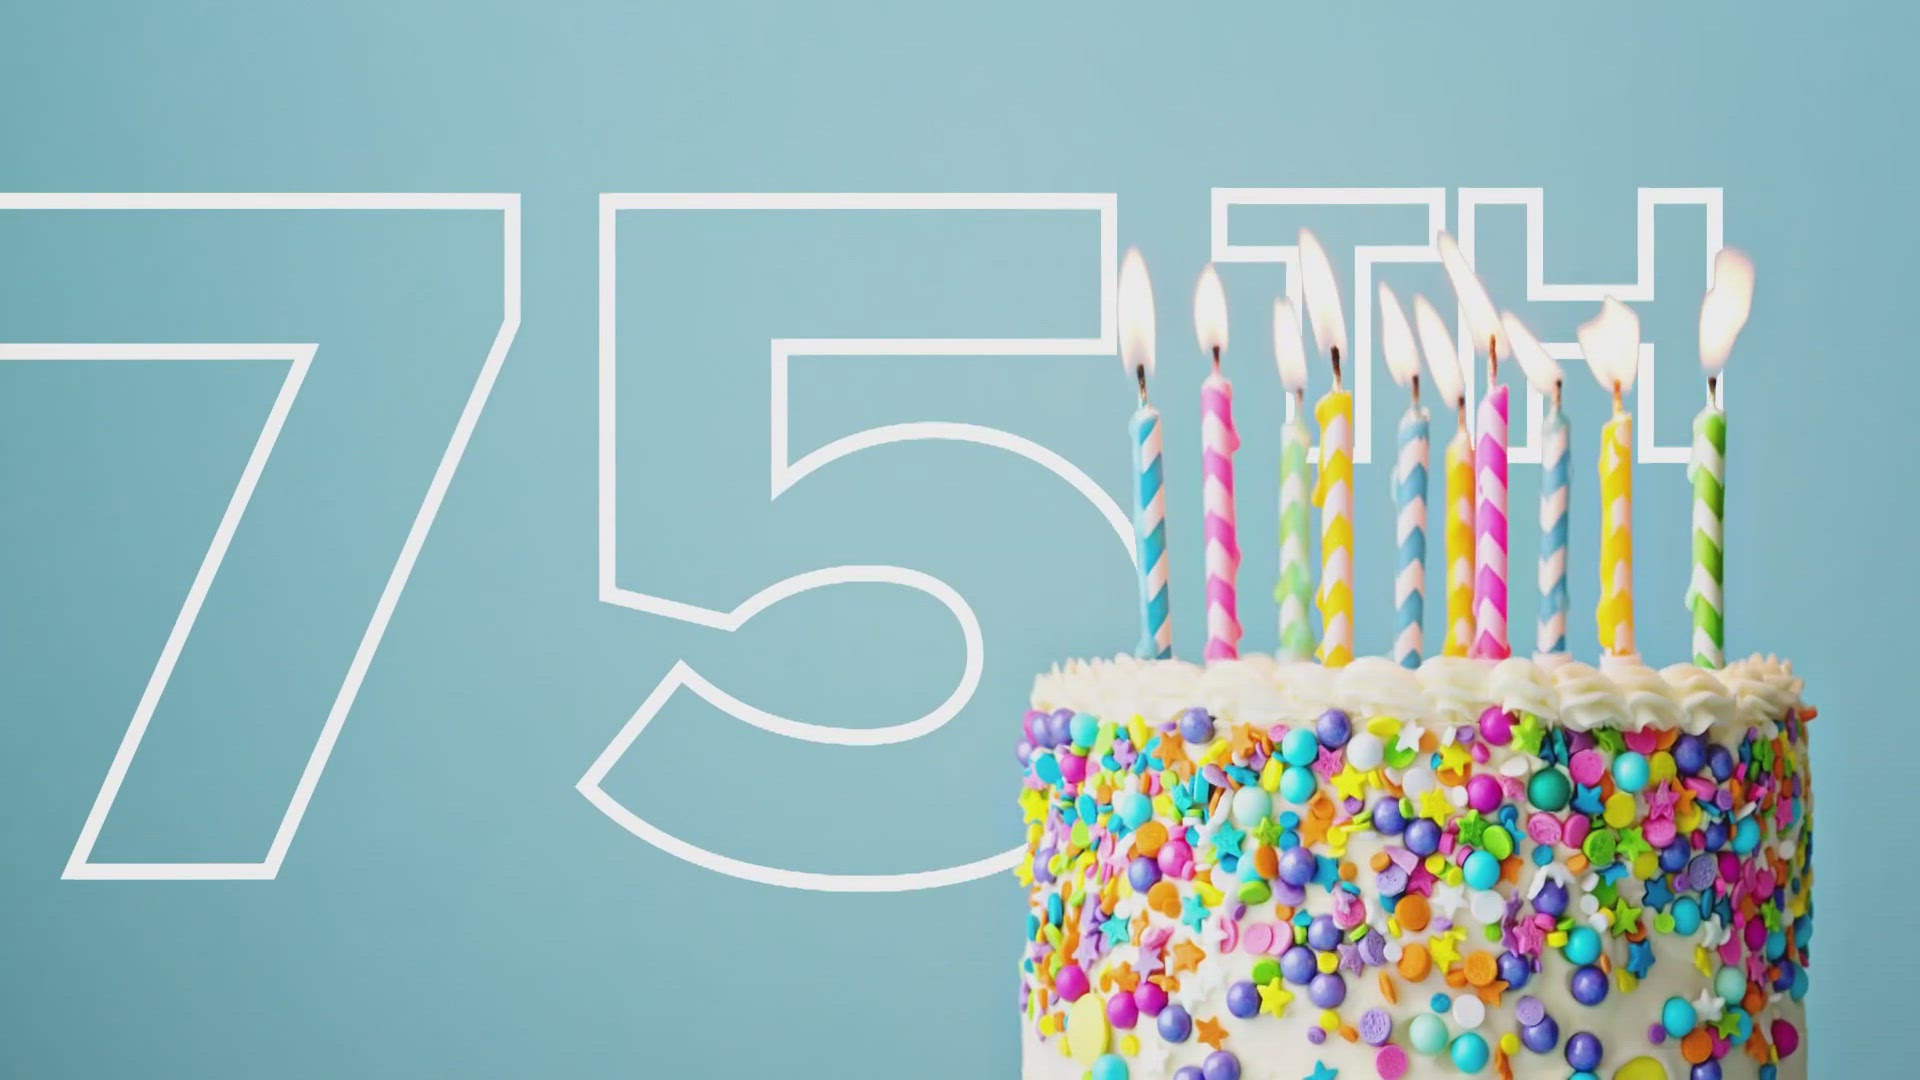 WFMY News 2 wishes viewers who are turning 75th this month a Happy Birthday.